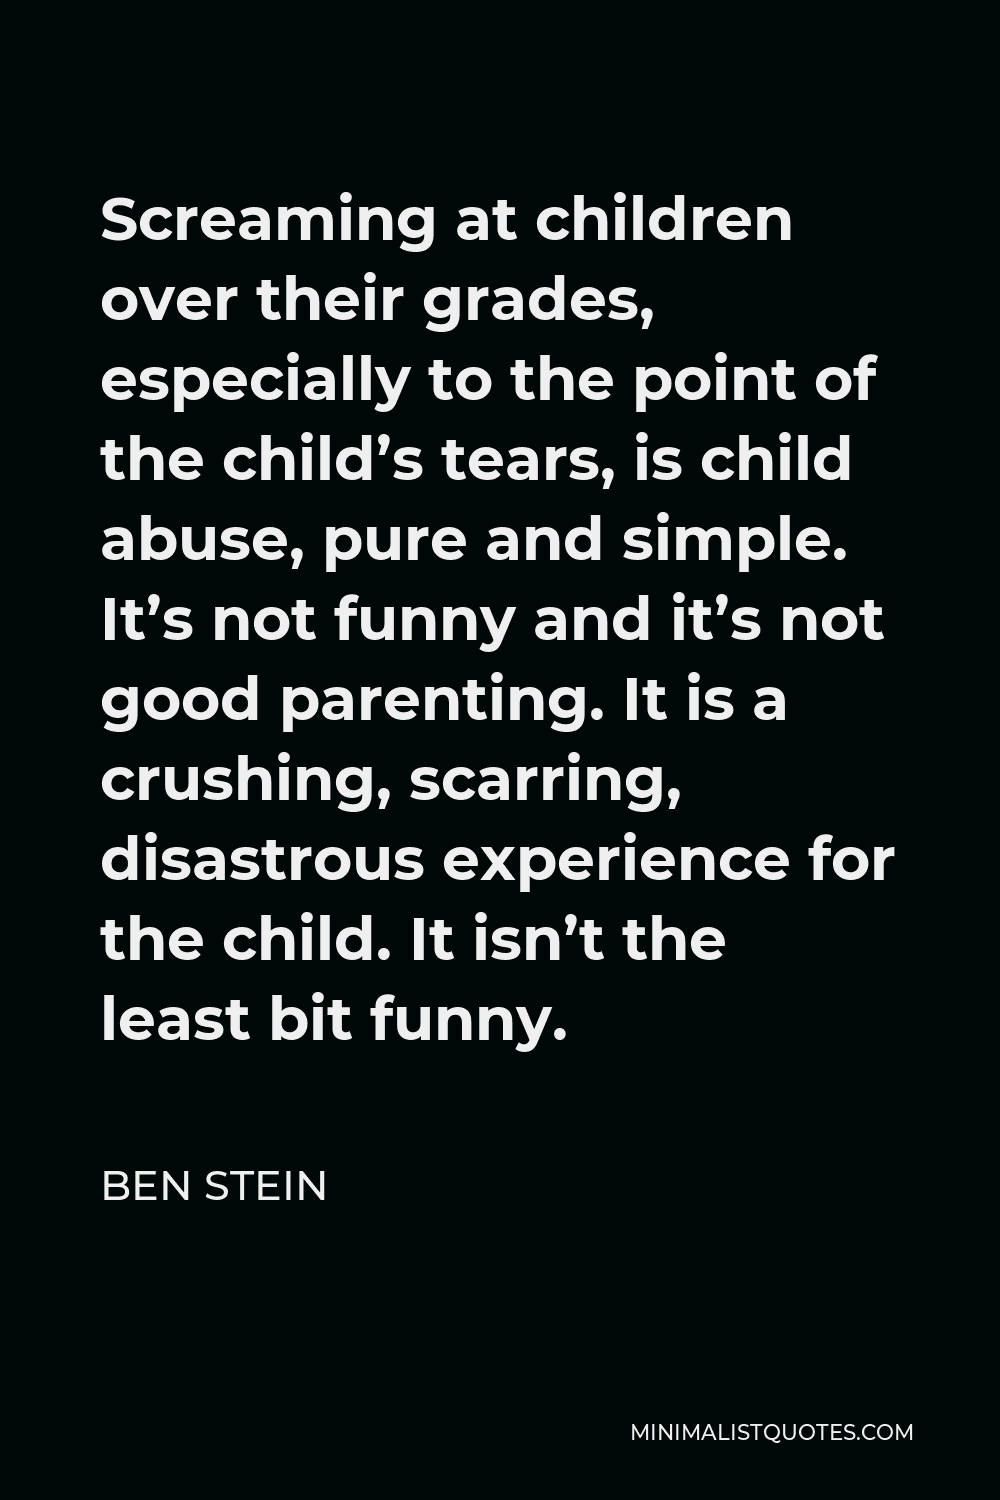 Ben Stein Quote - Screaming at children over their grades, especially to the point of the child’s tears, is child abuse, pure and simple. It’s not funny and it’s not good parenting. It is a crushing, scarring, disastrous experience for the child. It isn’t the least bit funny.